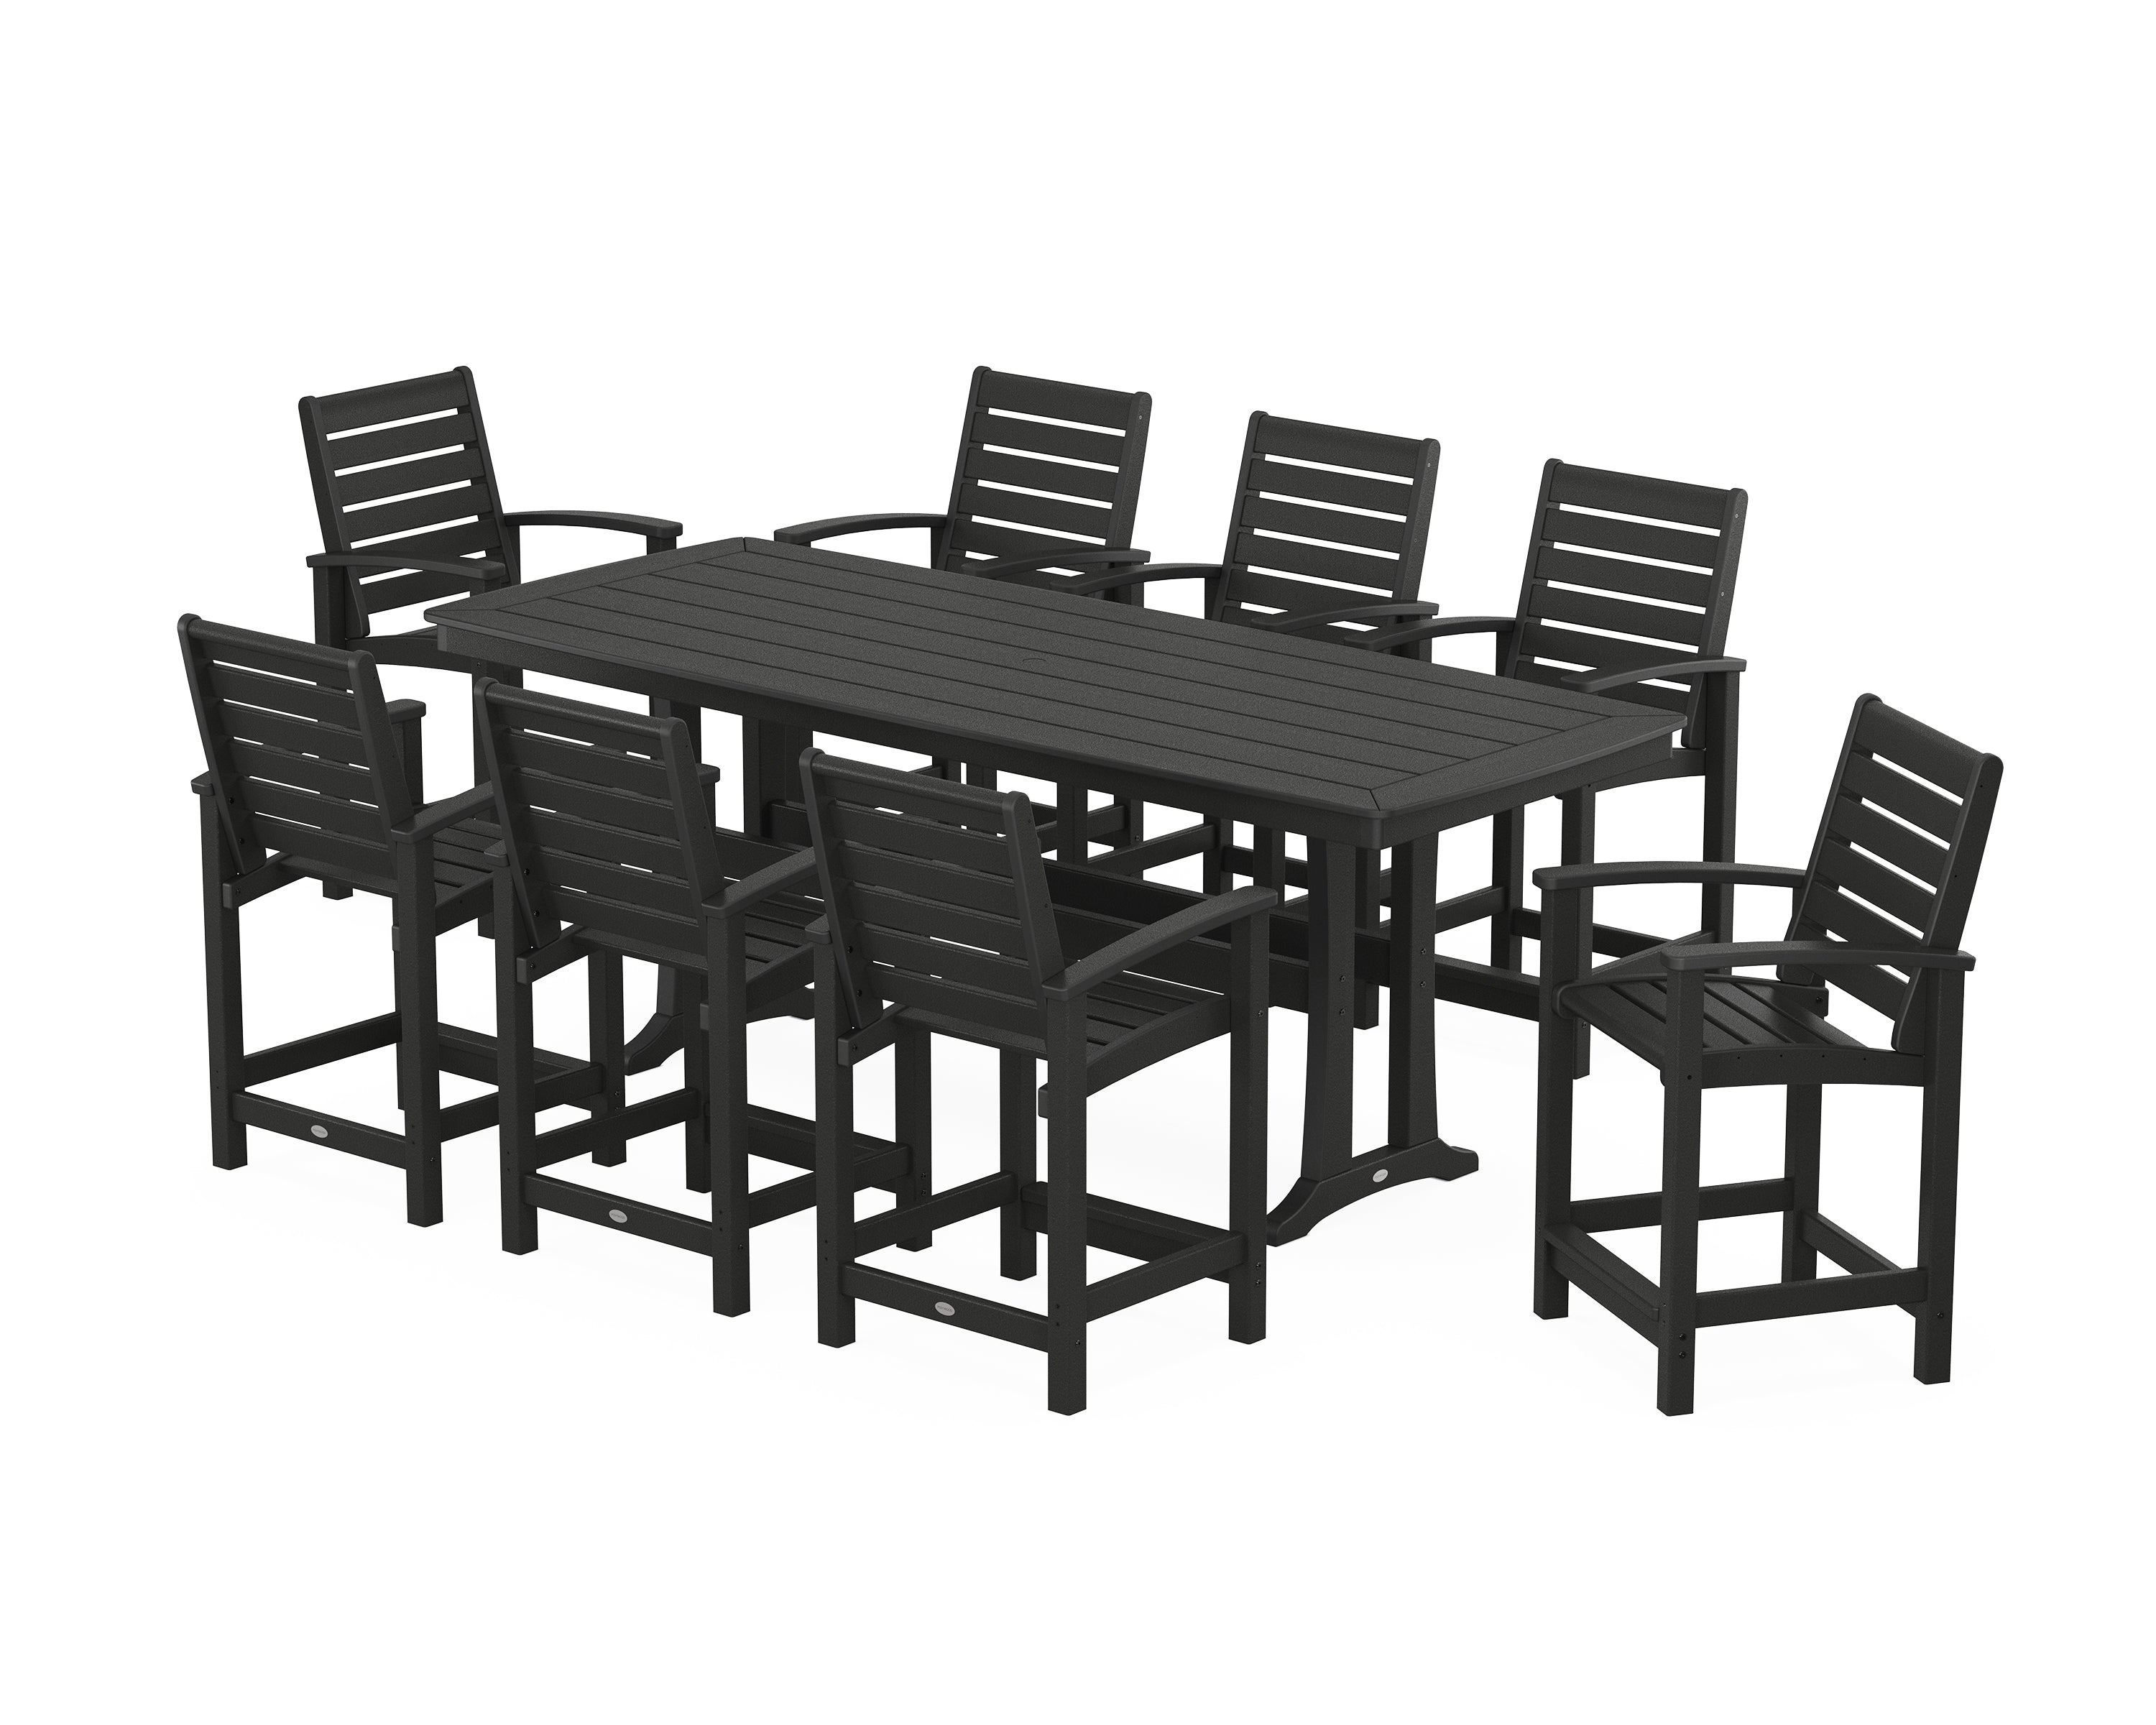 POLYWOOD® Signature 9-Piece Counter Set with Trestle Legs in Black